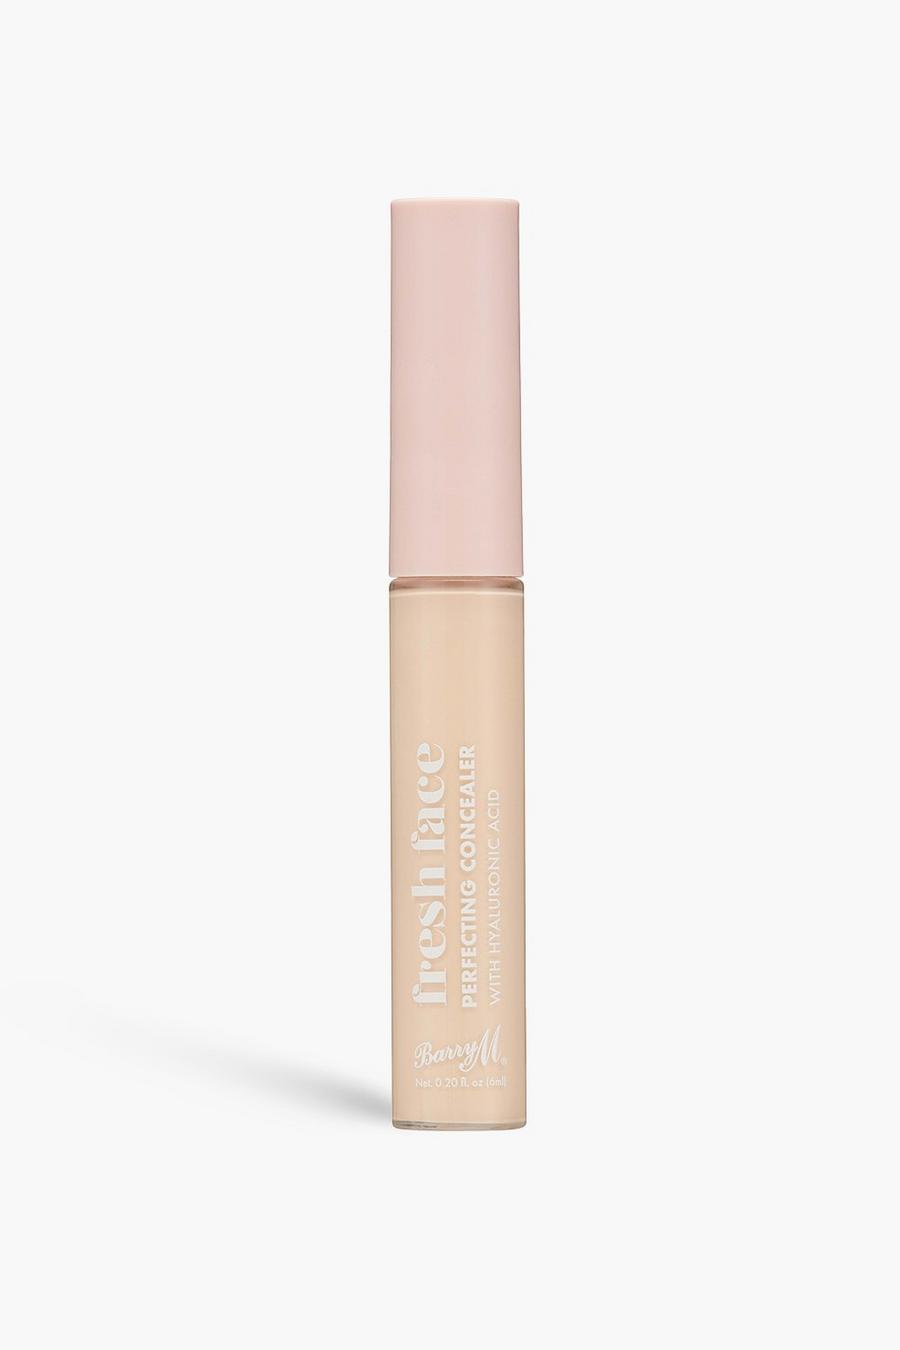 Cream white Barry M Fresh Face Perfecting Concealer 1